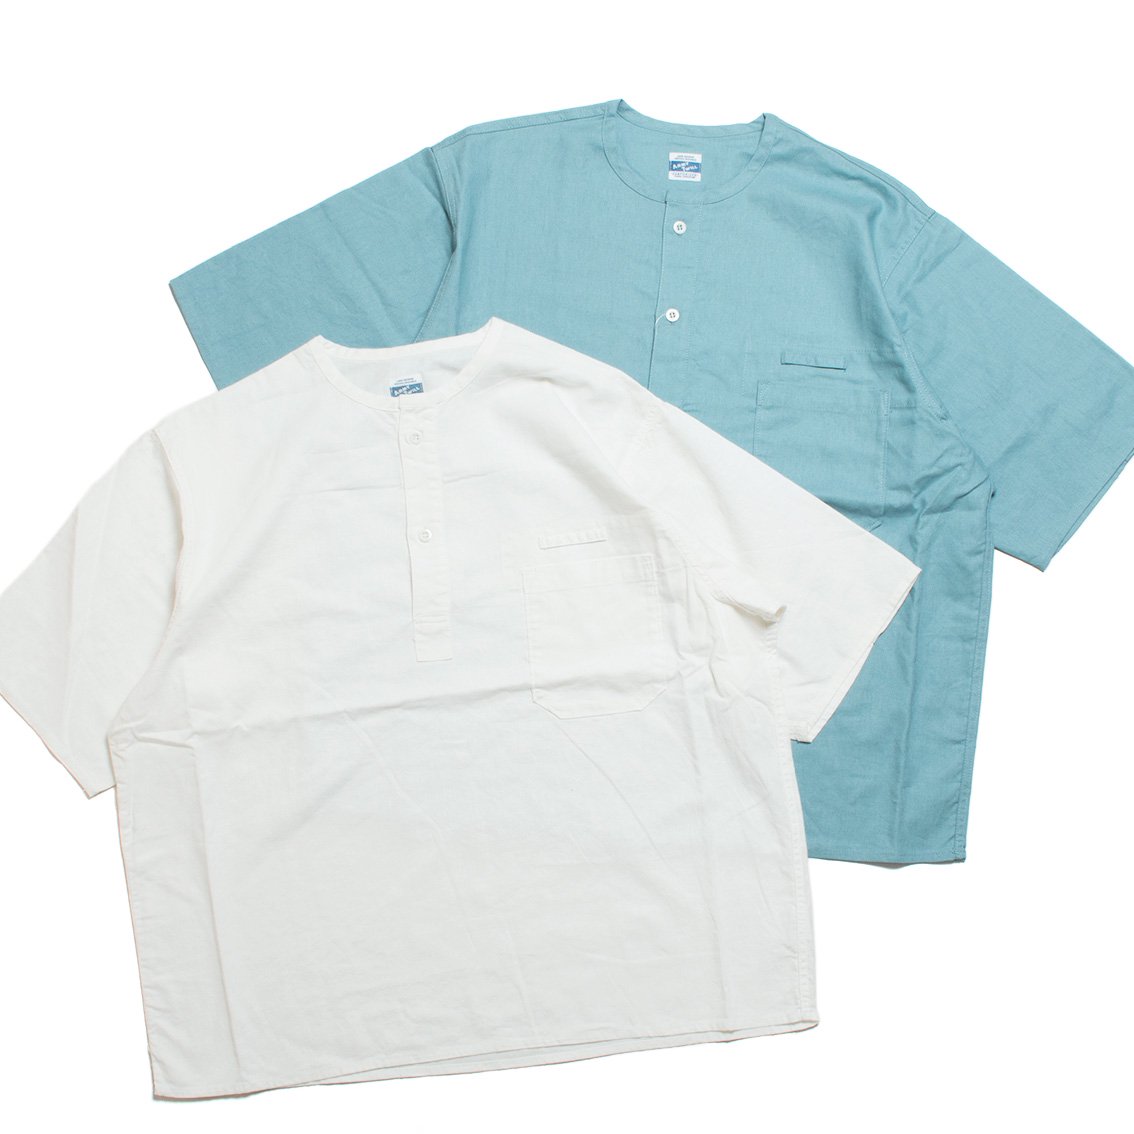 ARMY TWILL / アーミーツイル] COTTON/LINEN SLAB H/S HENLEY SHIRT